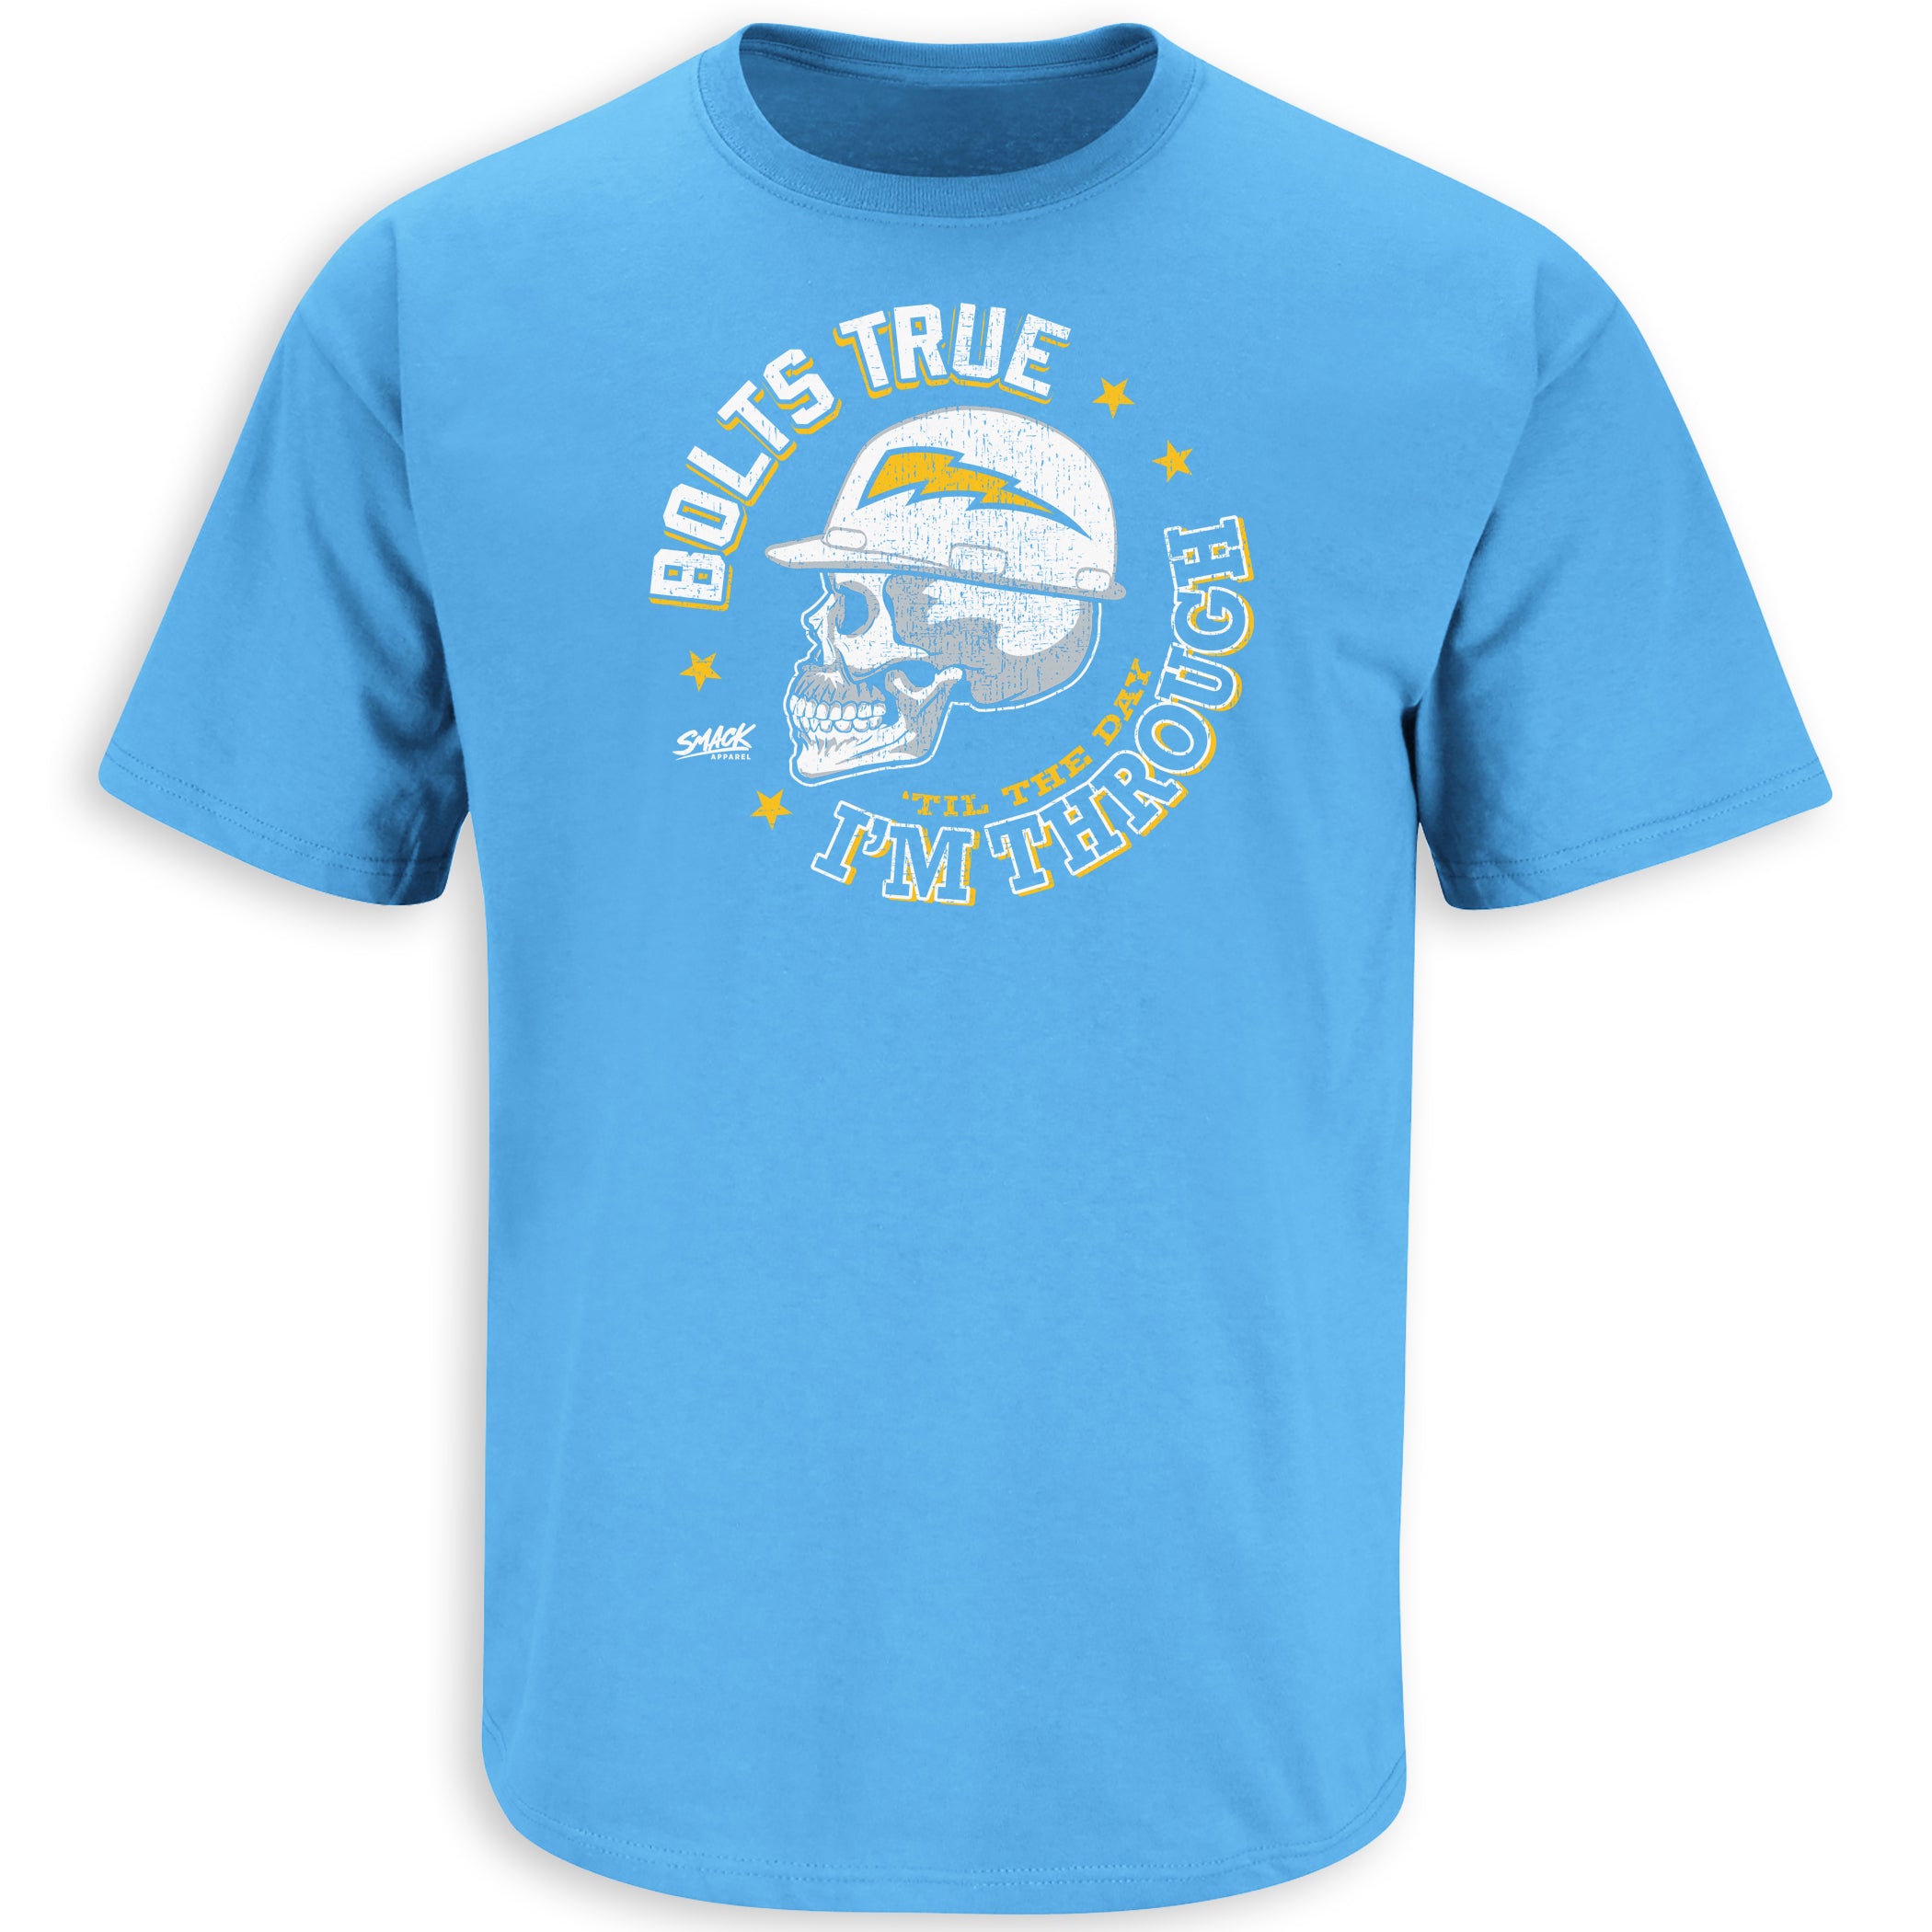 Buy True Tee, Fast Delivery